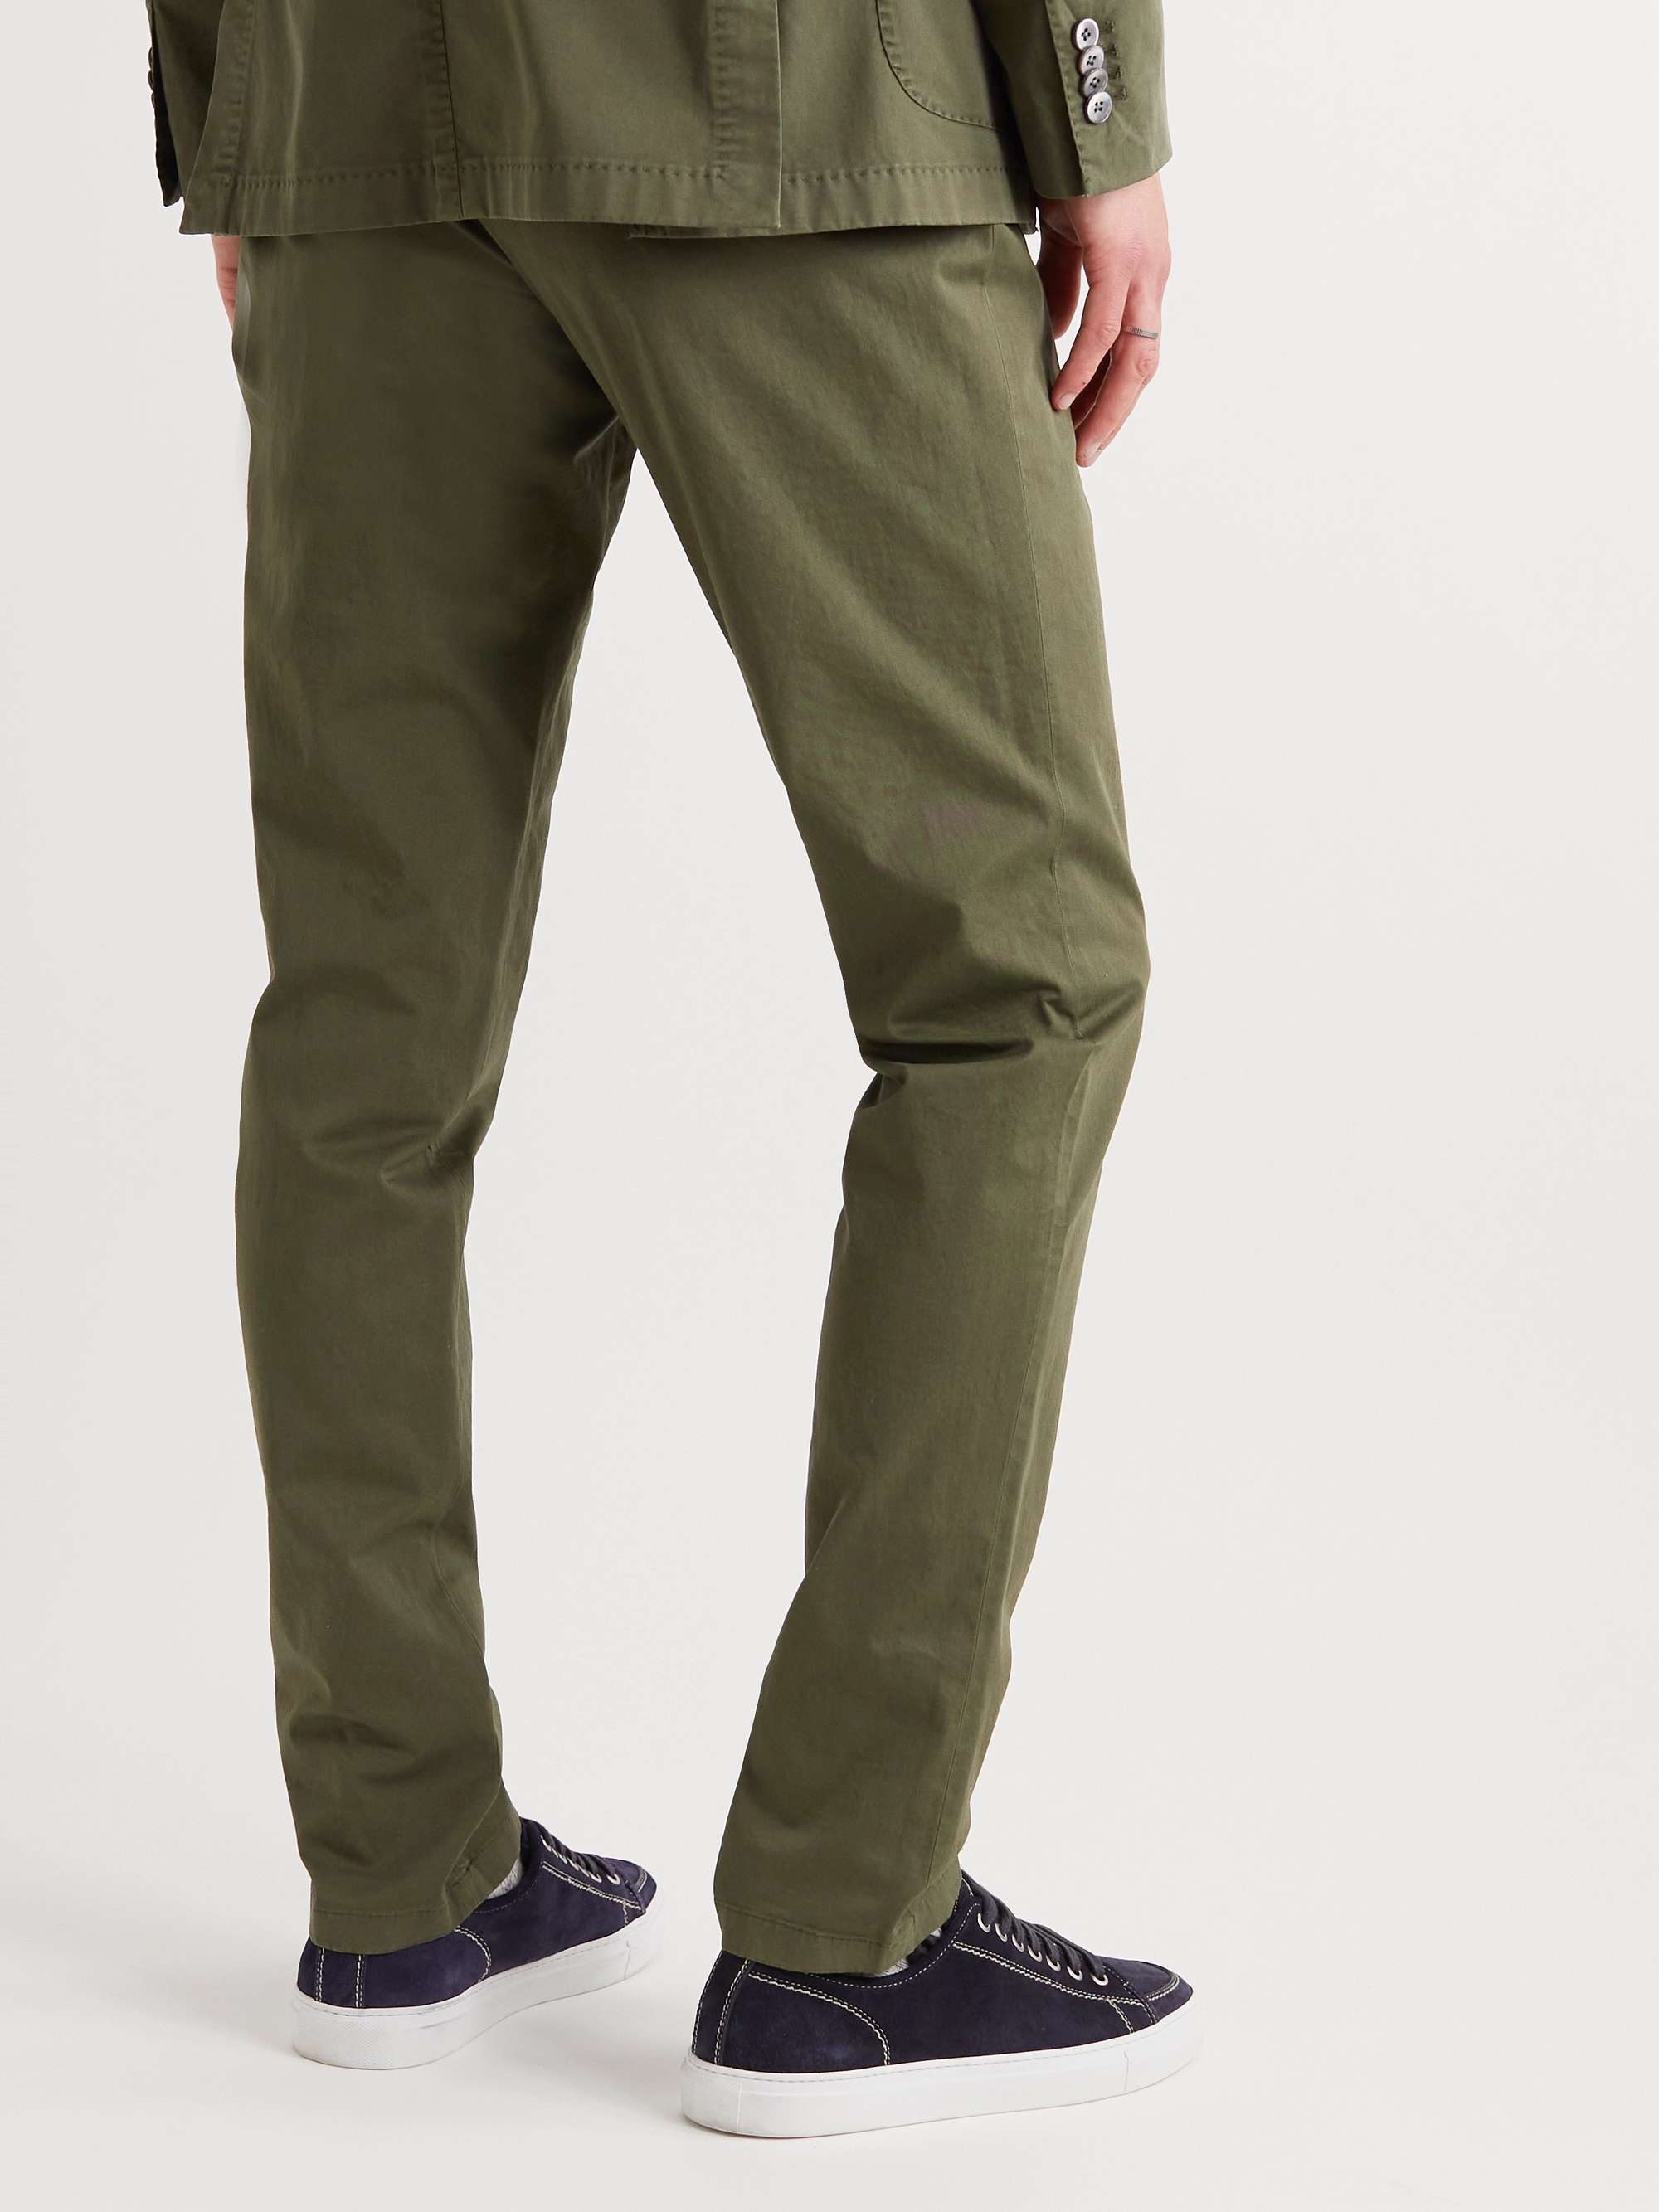 BOGLIOLI Green Slim-Fit Stretch Cotton Pants ~ Made in Italy 